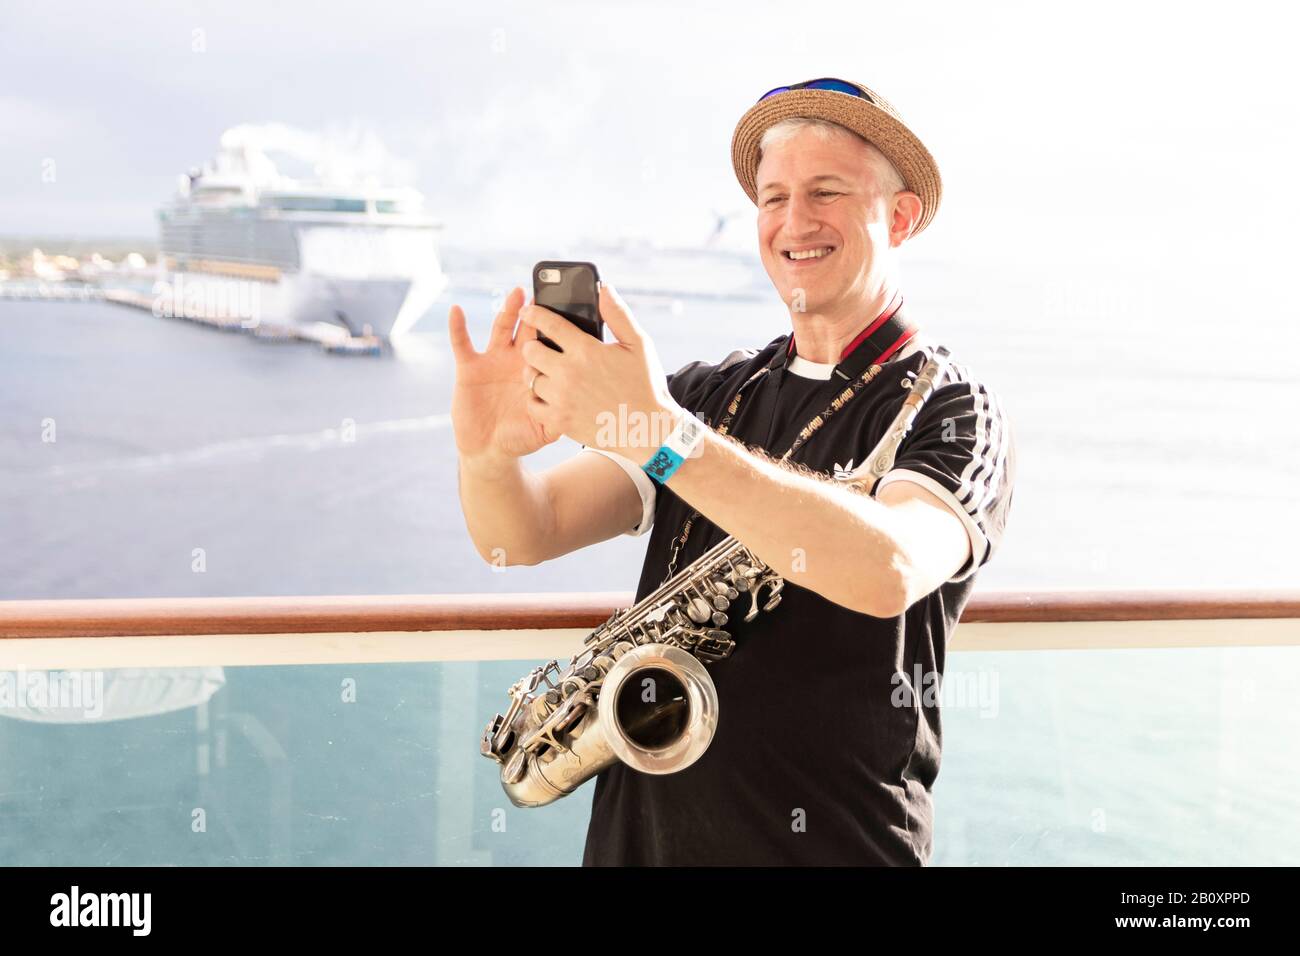 Jolly good time in the Caribbean sun; a smiling saxophone man takes a cell phone photo with a cruise ship at sea in the background. Stock Photo